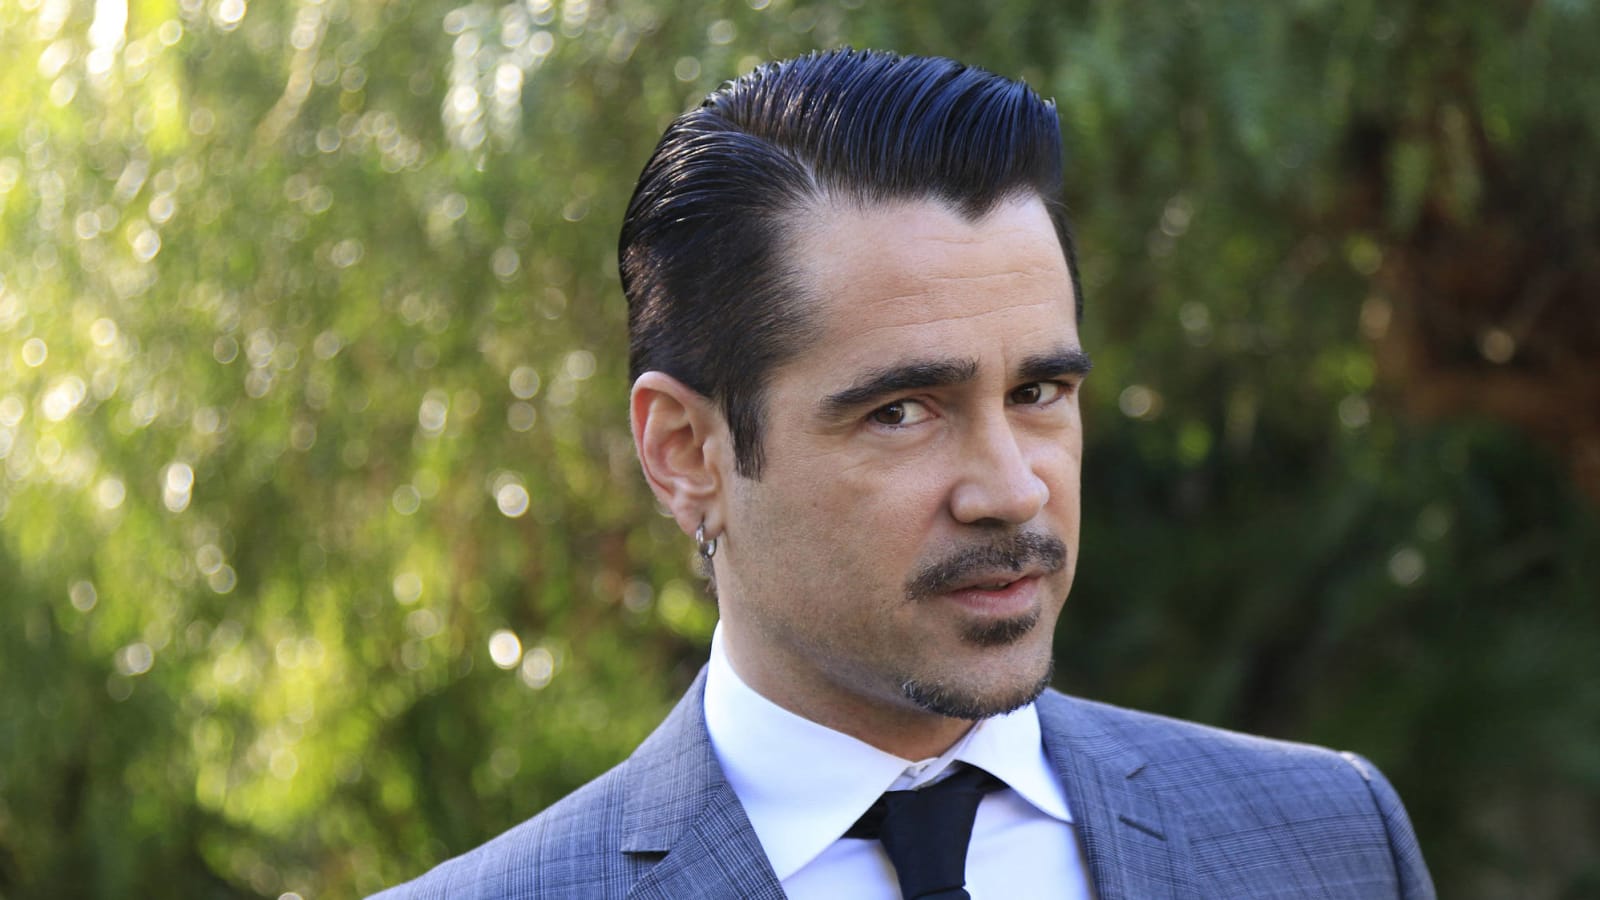 Colin Farrell gets choked up discussing Los Angeles homelessness: 'I don't get it'